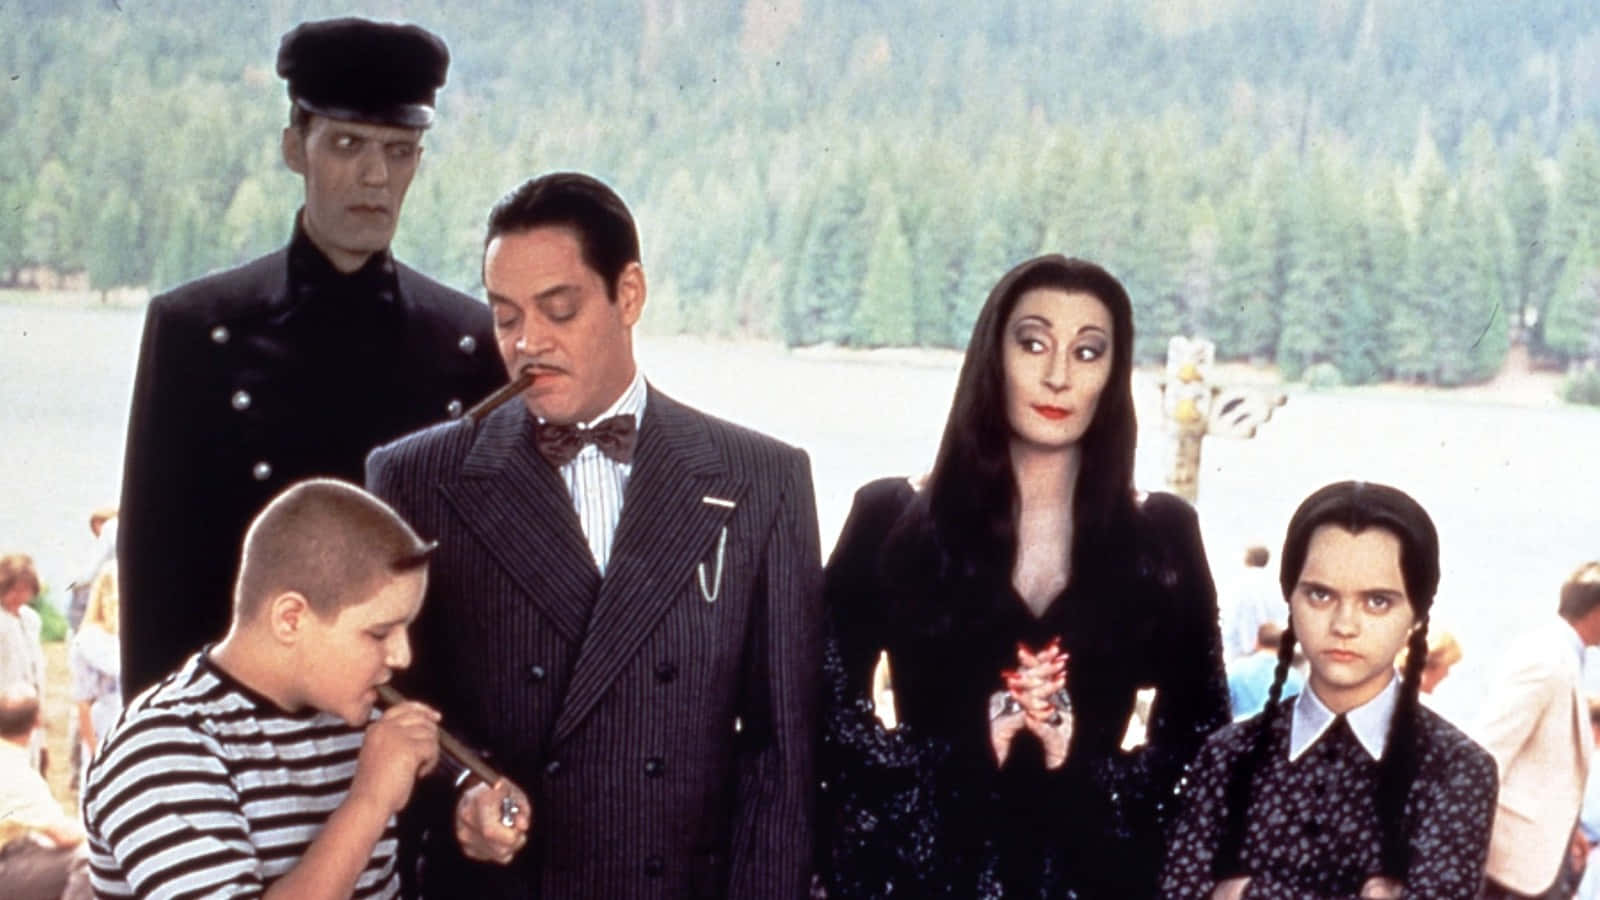 The Addams Family Misadventures